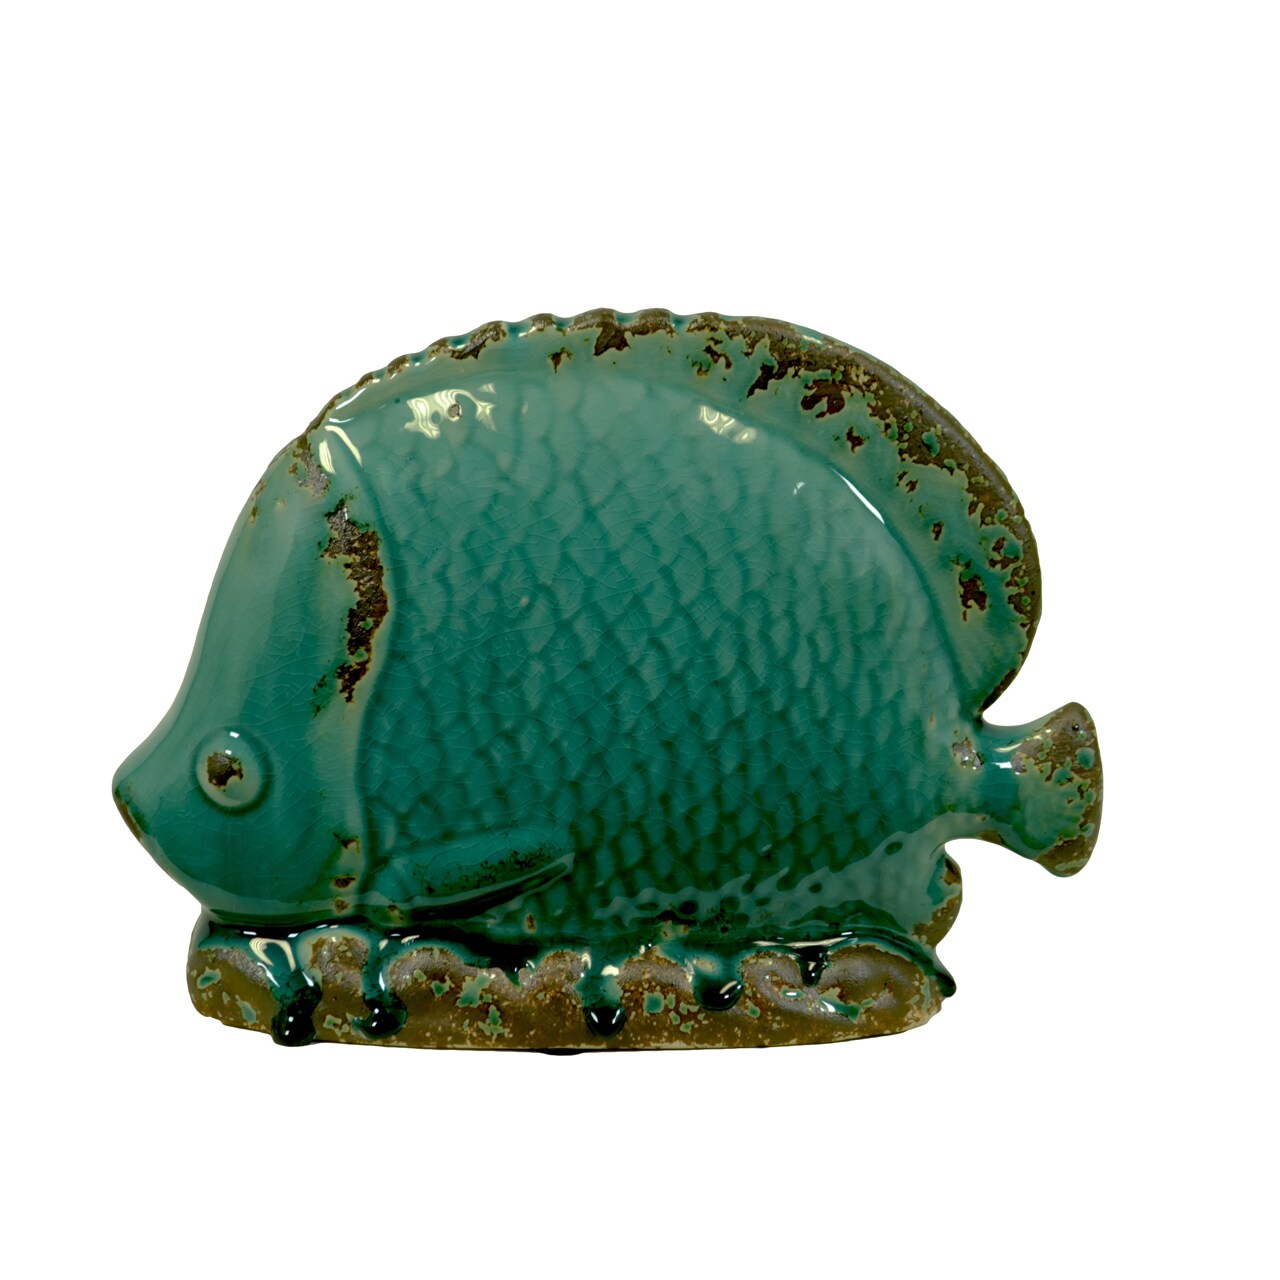 Blue Ceramic Fish Figurine (CeramicDimensions 11 inches wide x 4 inches deep x 8 inches highFor Decorative Purposes Only)